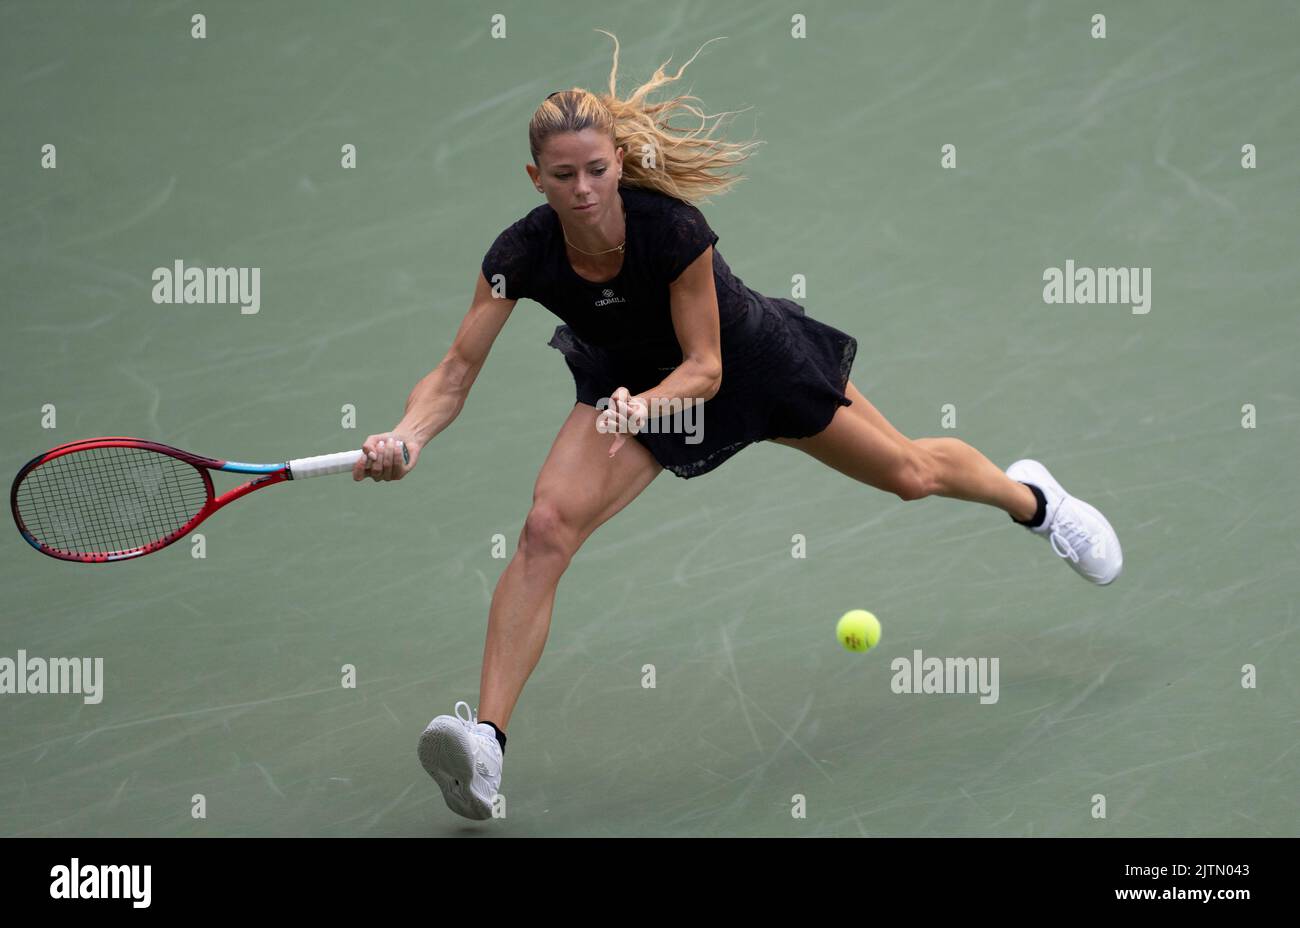 New York, US, August 31, 2022: Camila Giorgi (ITA) loses to Madison Keys (USA), 6-4, 5-7, 7-6 at the US Open being played at Billie Jean King Ntional Tennis Center in Flushing, Queens, New York, {USA} © Helga Schultz/Tennisclix Stock Photo